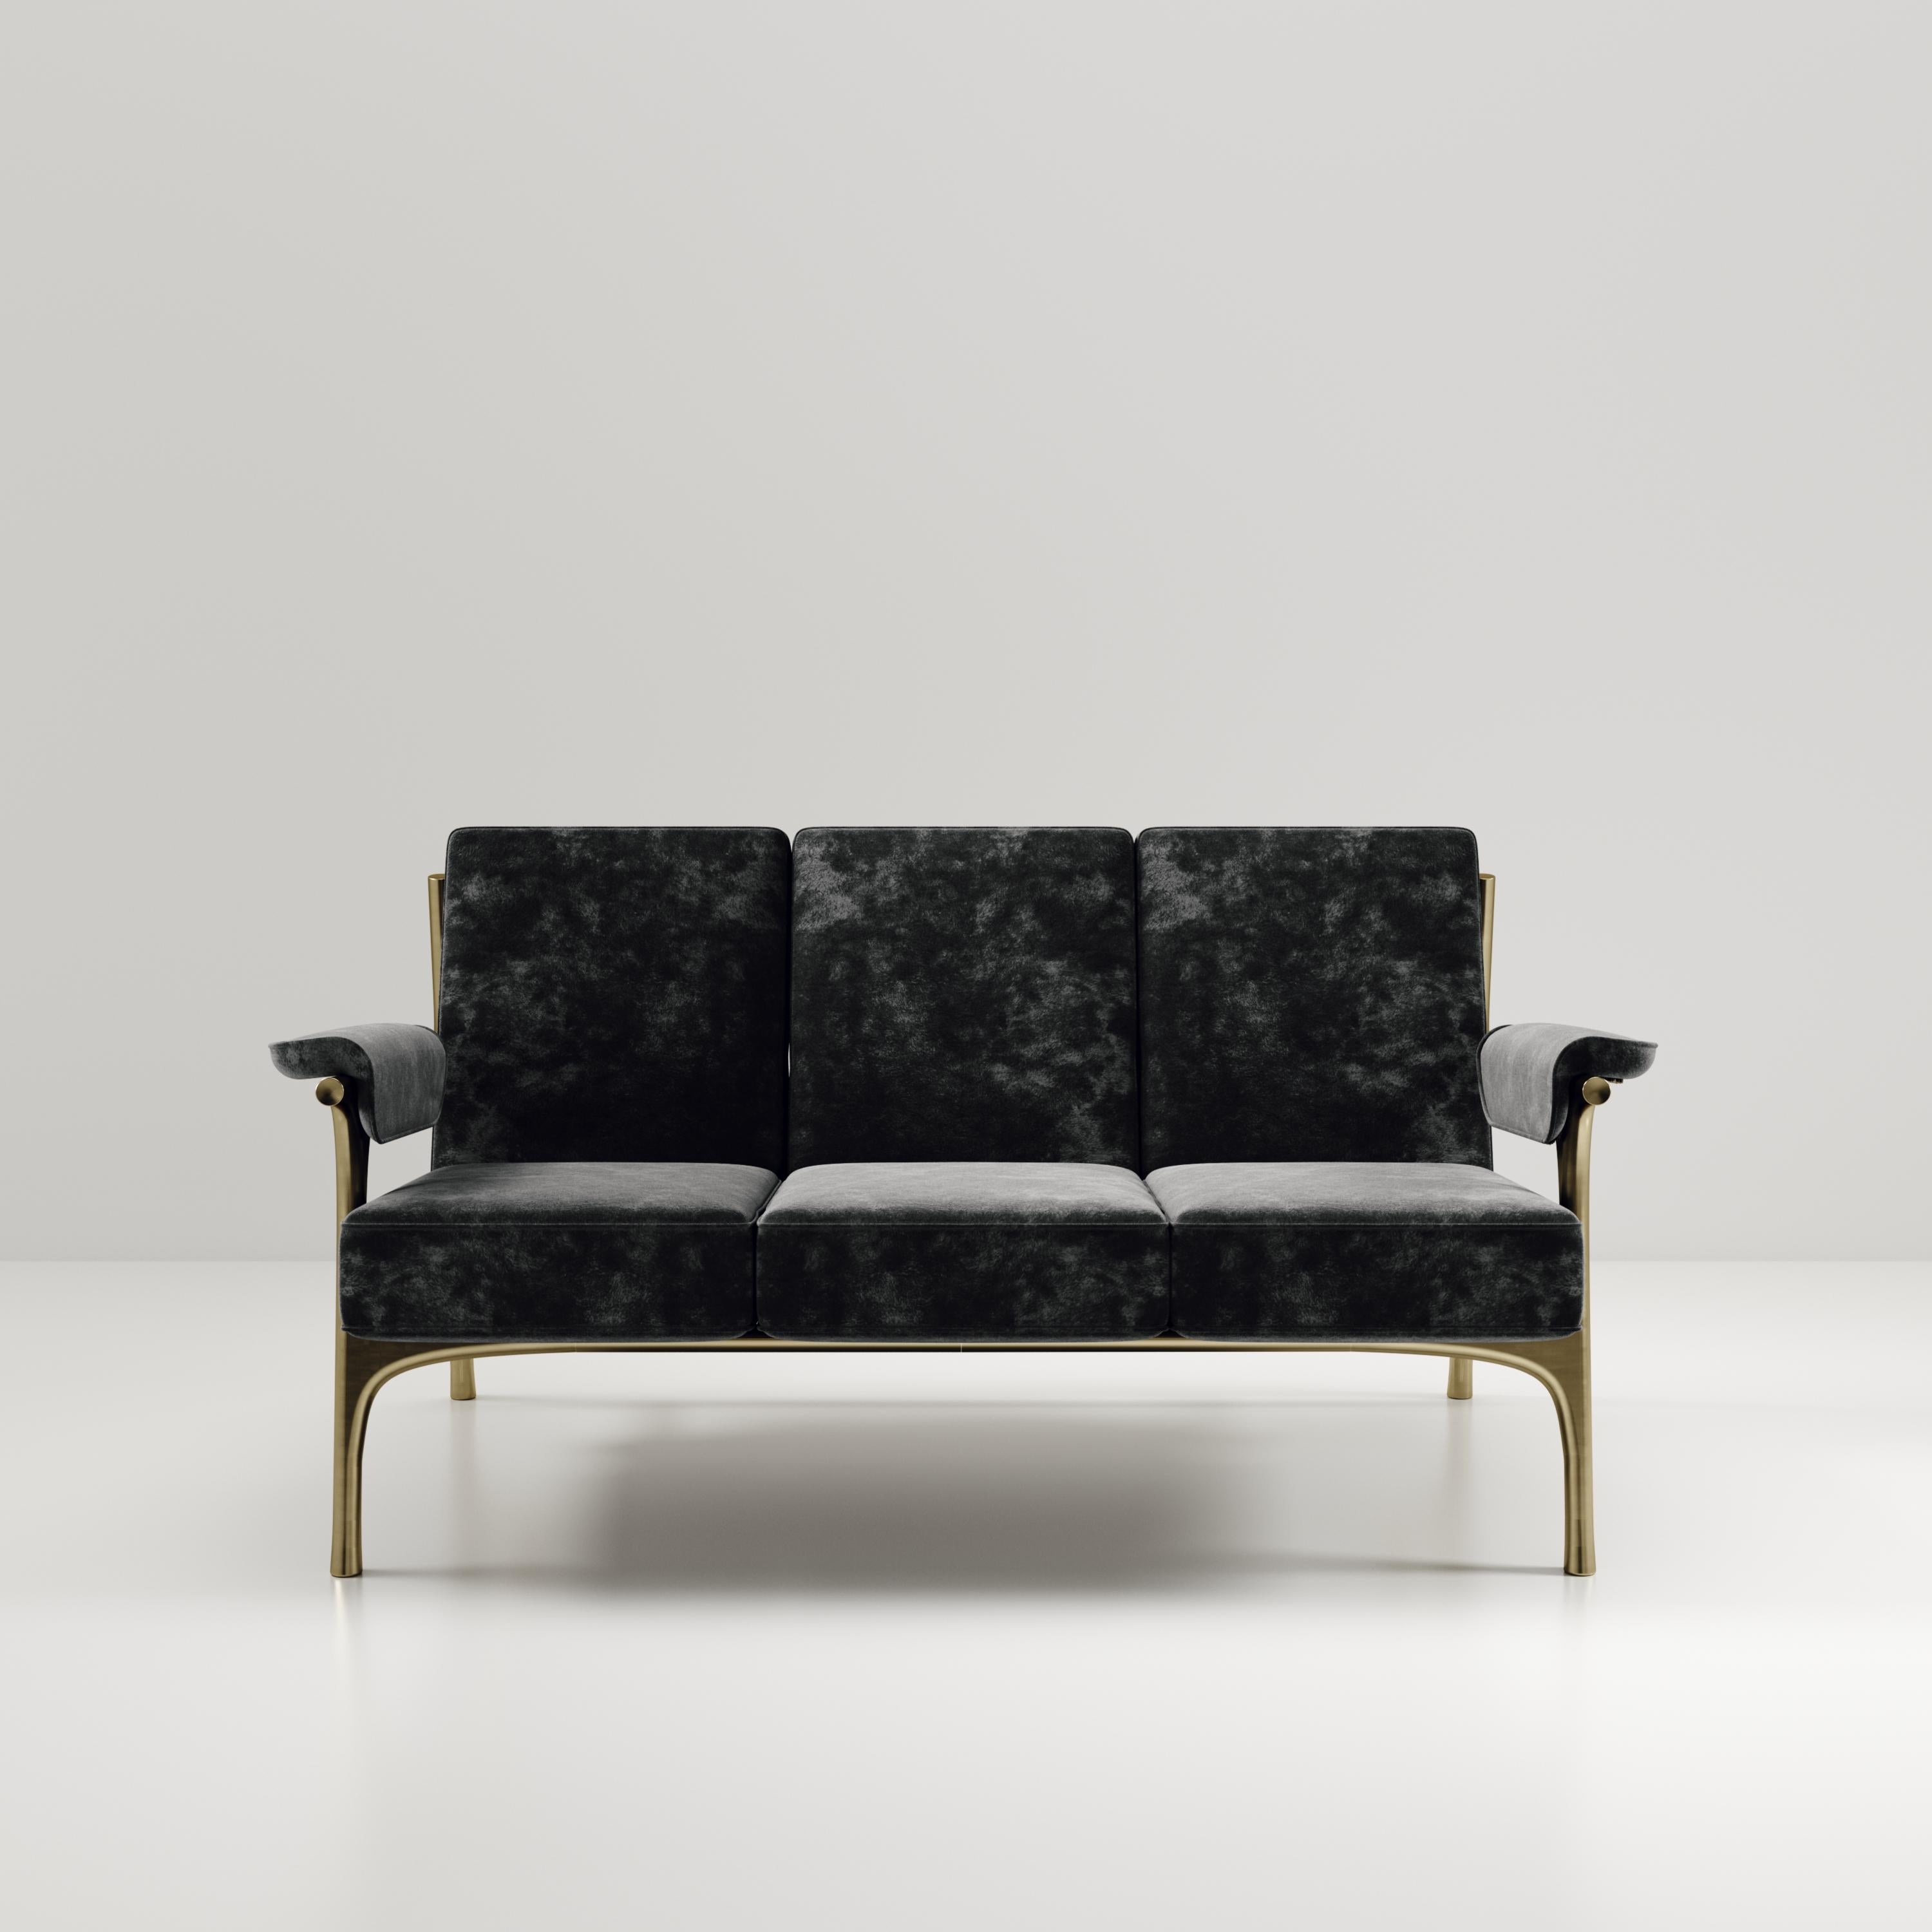 The Ramo sofa by R & Y Augousti is an elegant and versatile piece. The upholstered pieces provide comfort while retaining a unique aesthetic with the bronze-patina brass frame and details. This listing is priced for black velvet, see other listings